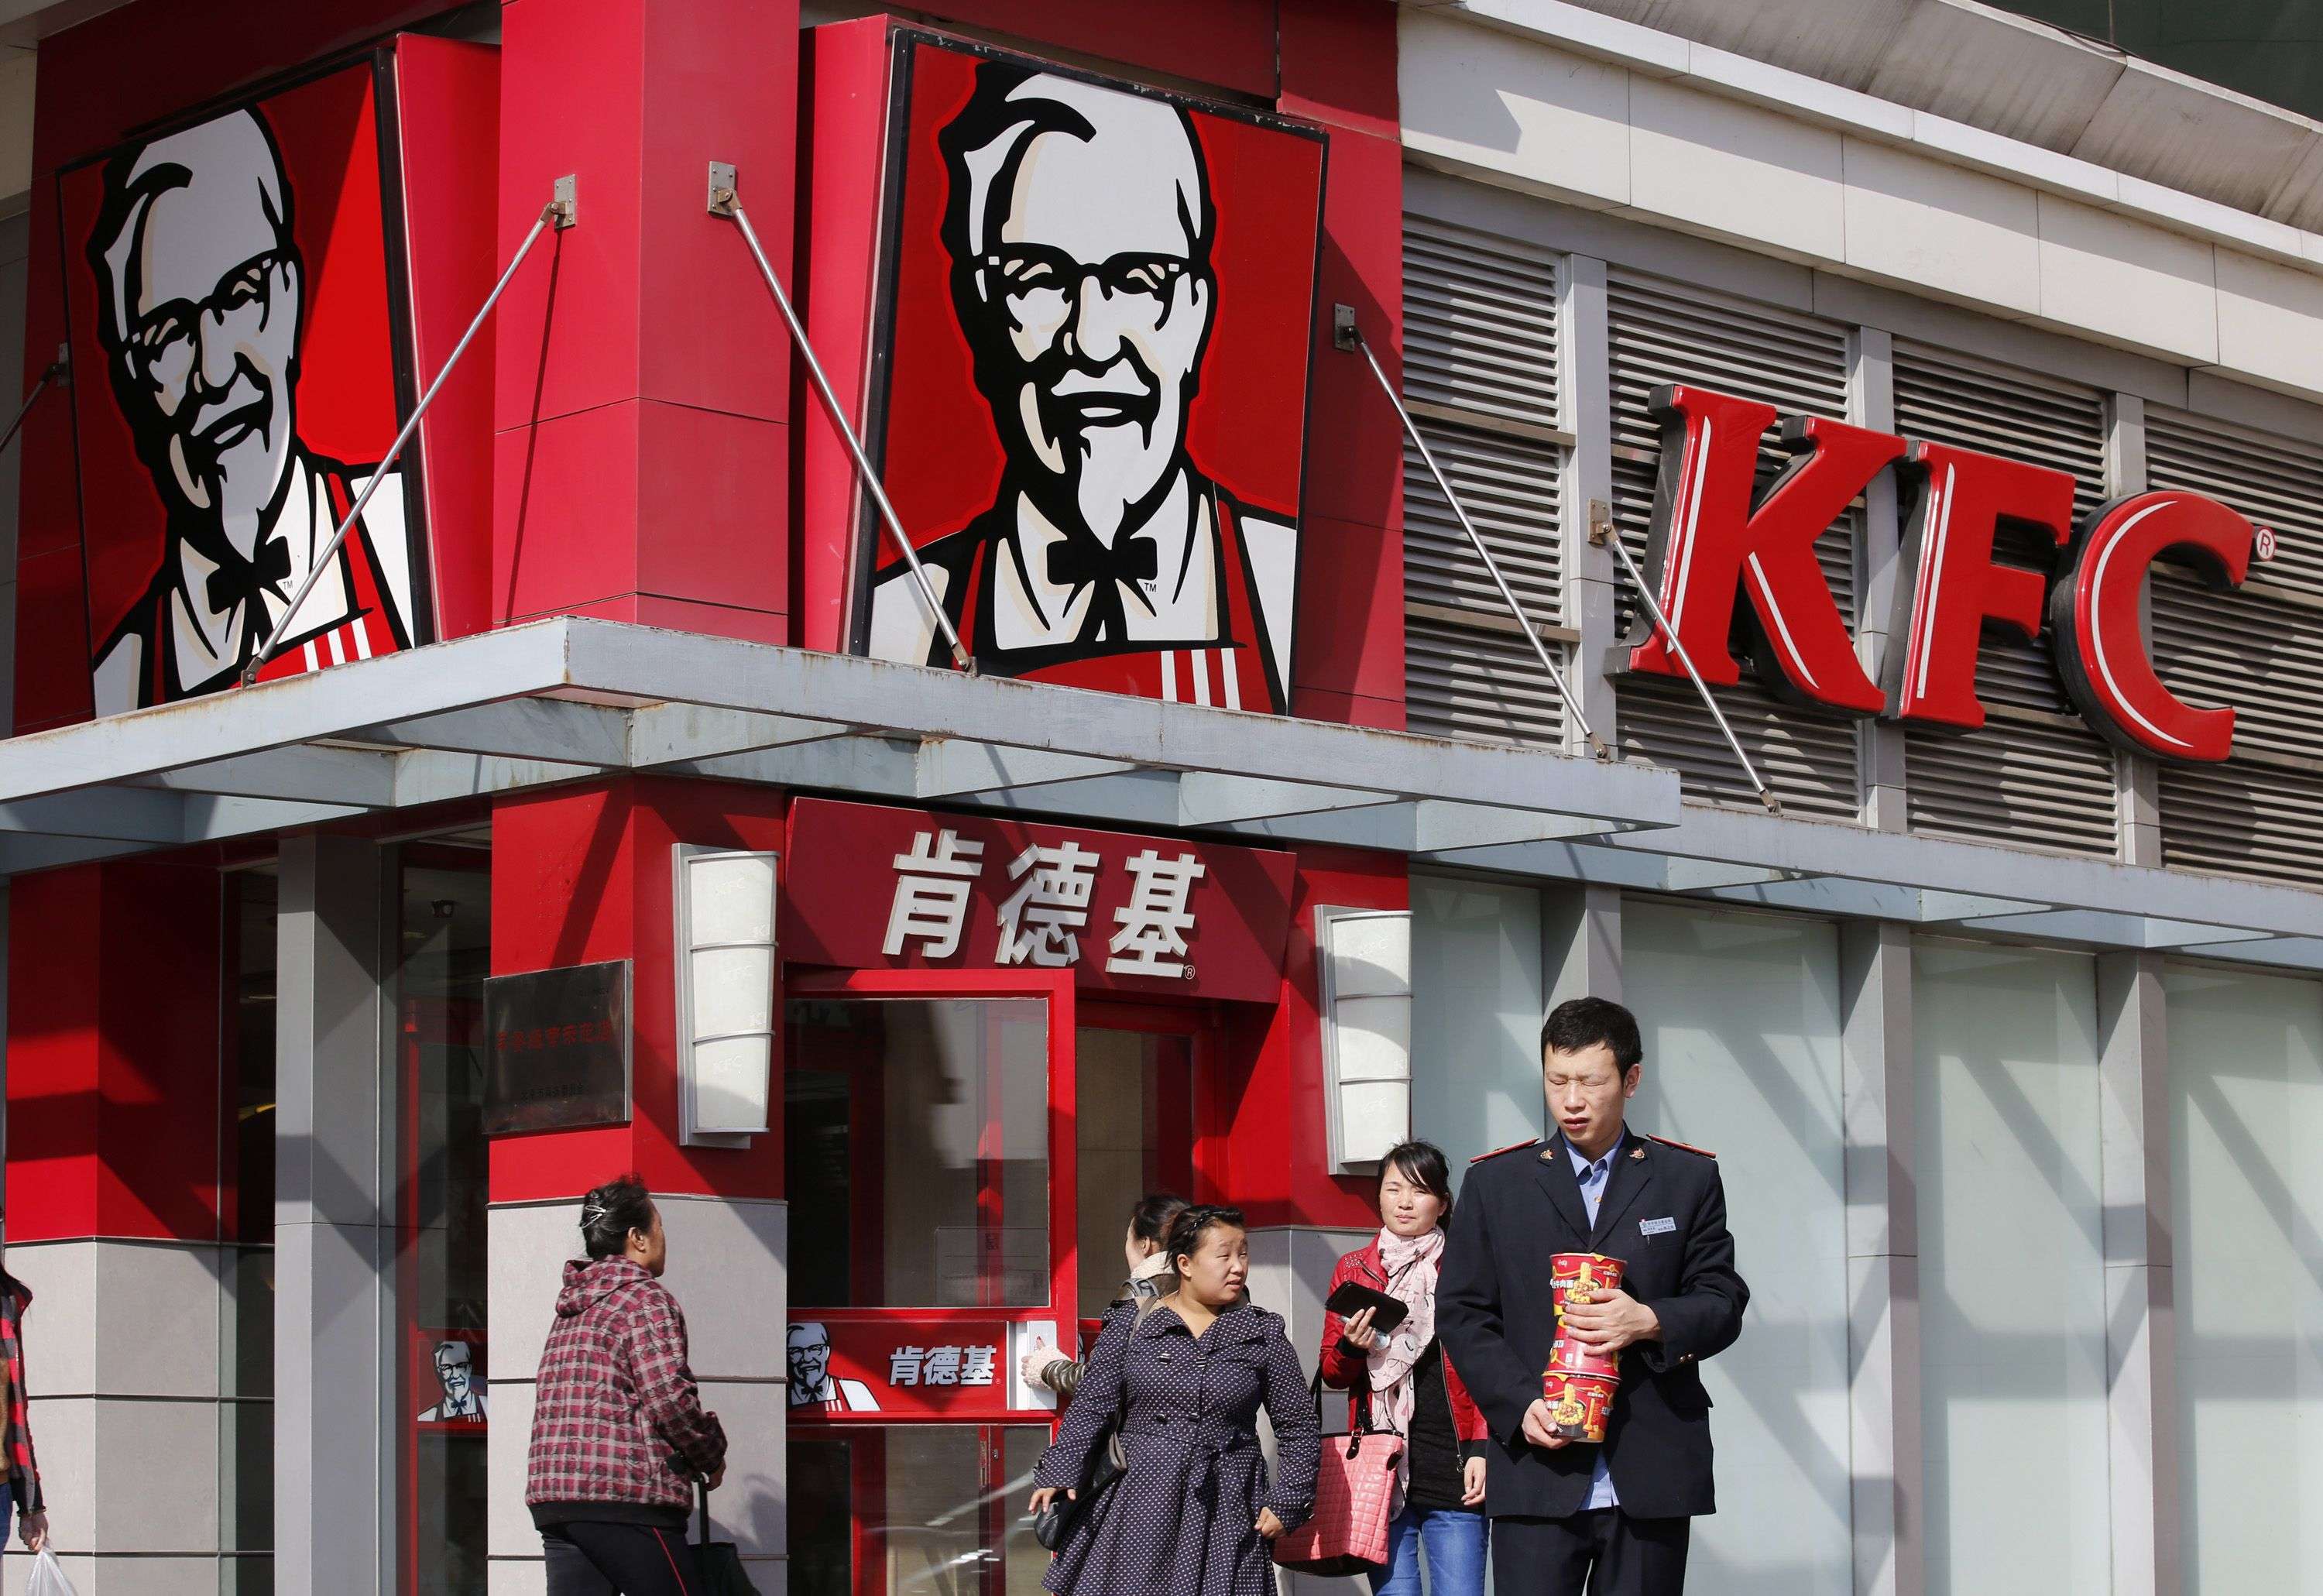 Yum’s China unit to operate independently from Yum Brands’ worldwide business, list on New York Stock Exchange on November 1